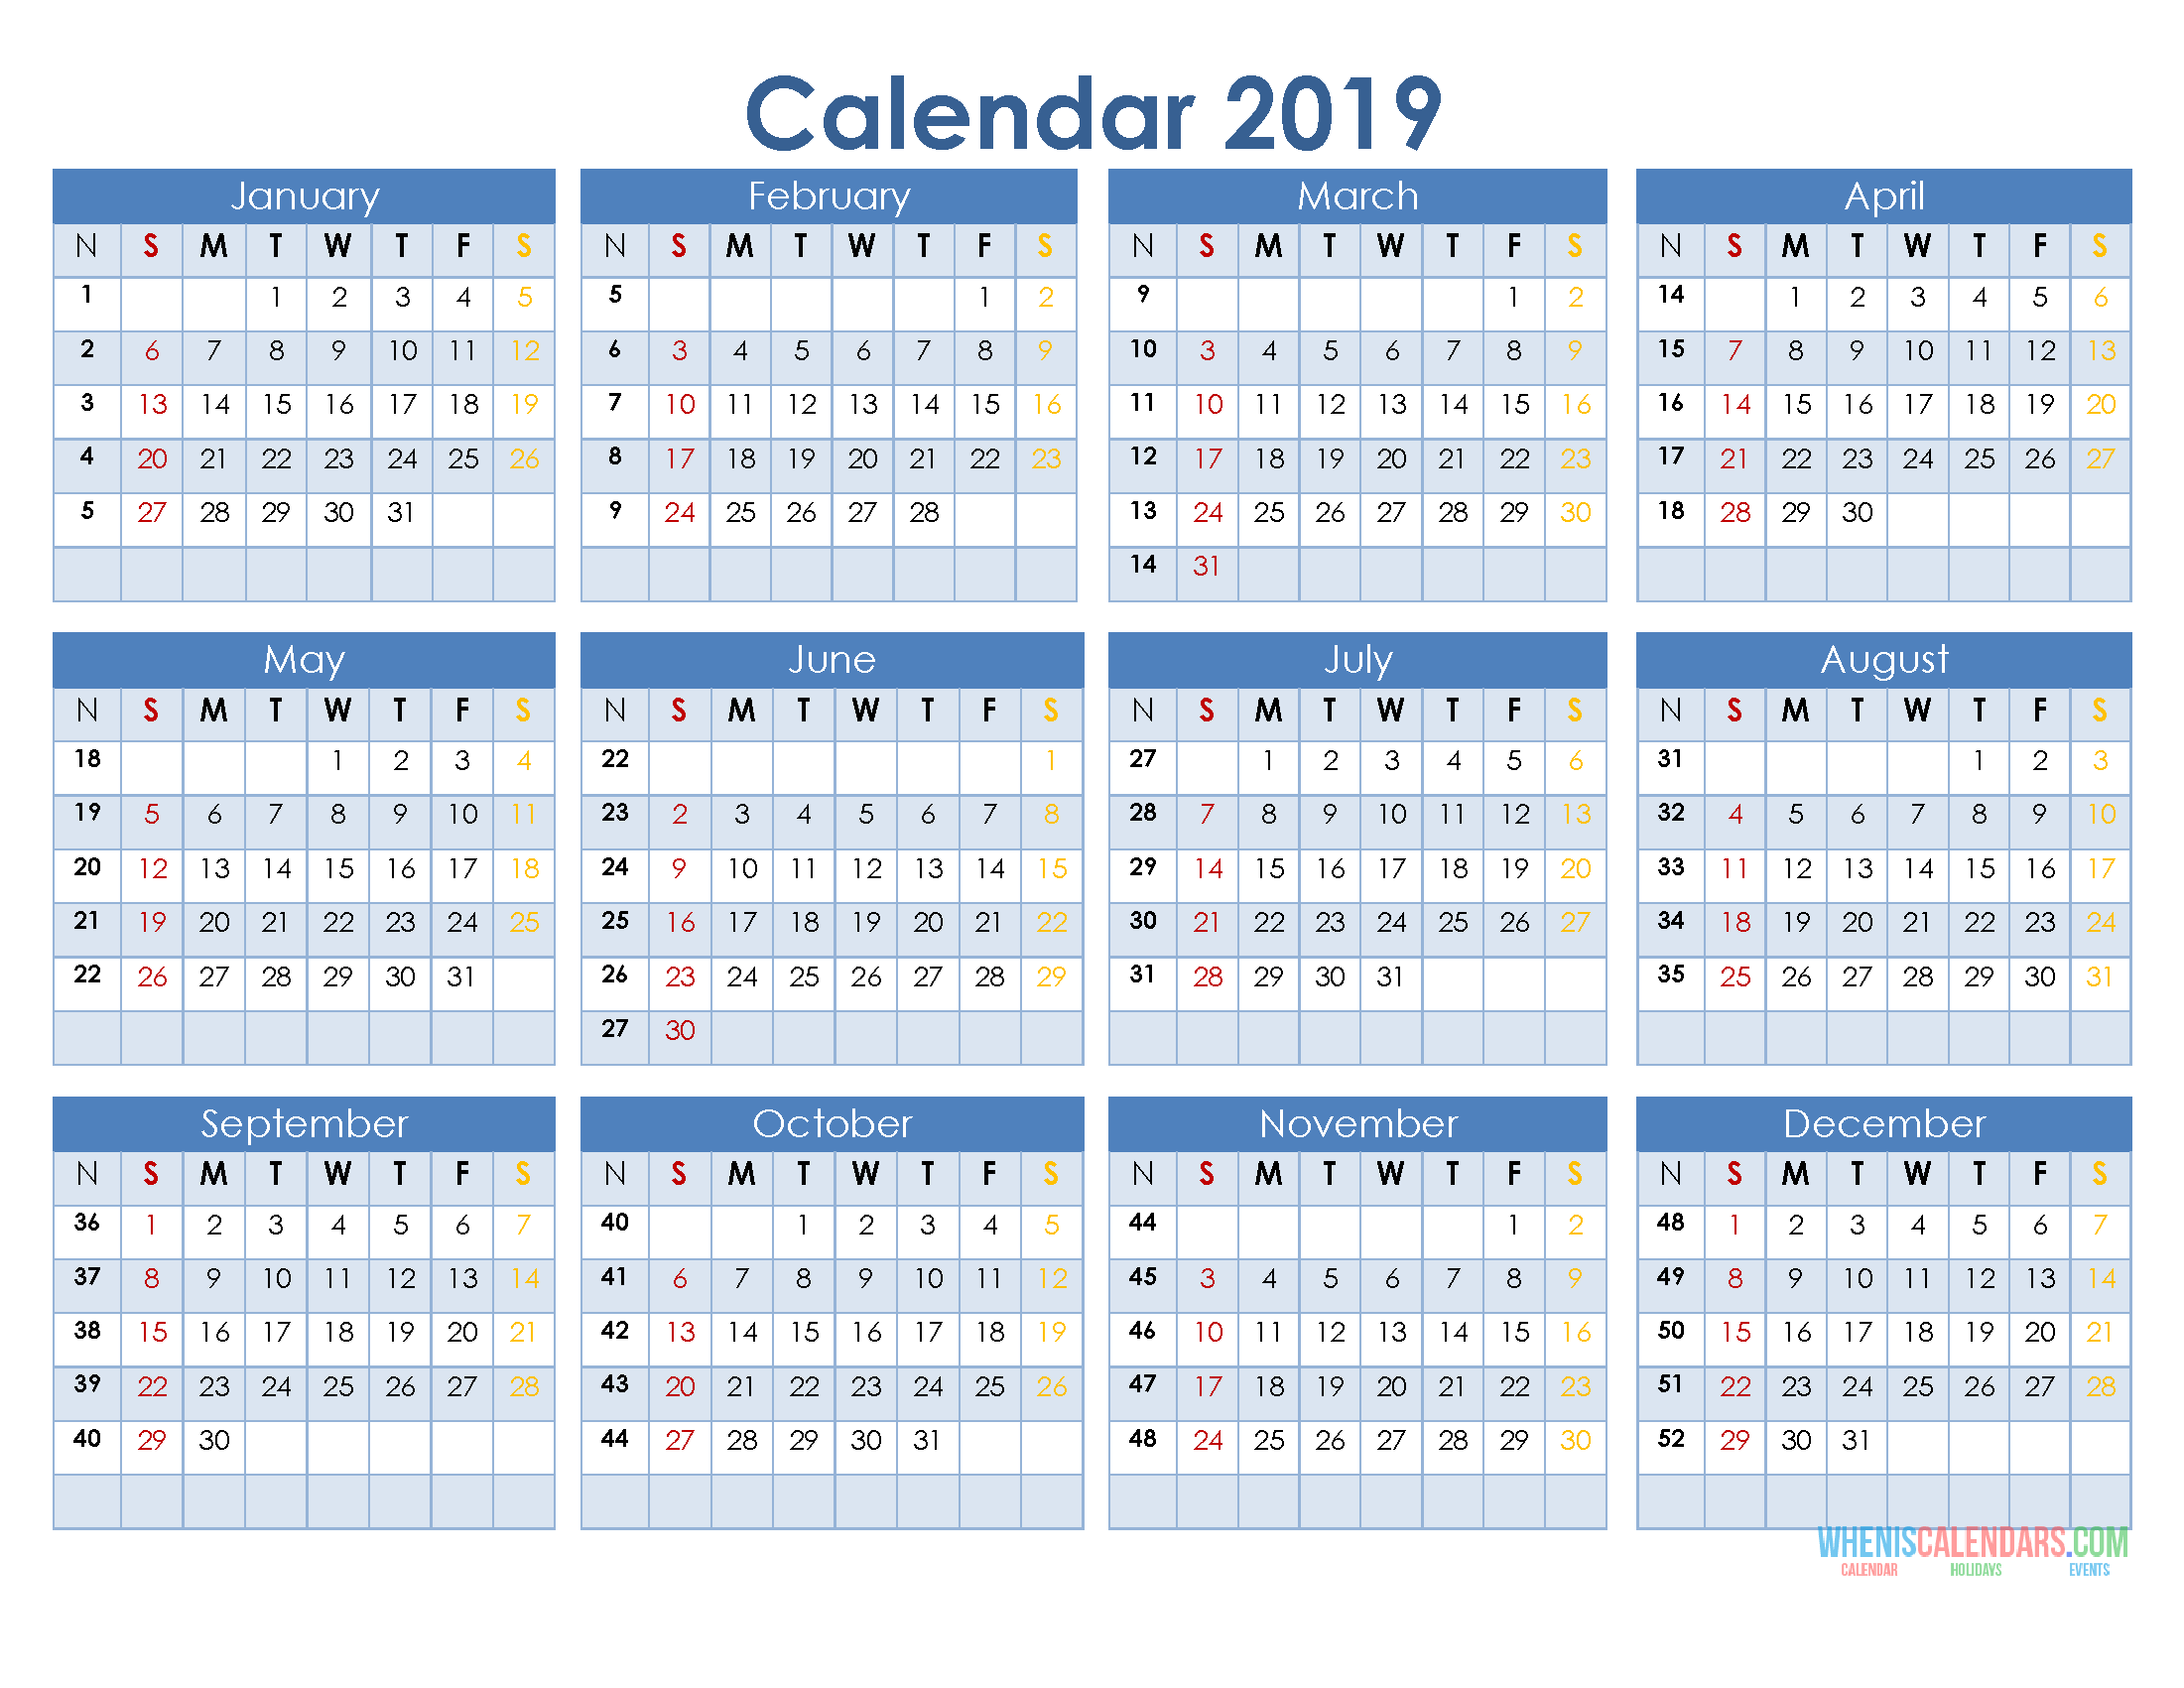 Yearly Calendar Template Word from www.wheniscalendars.com